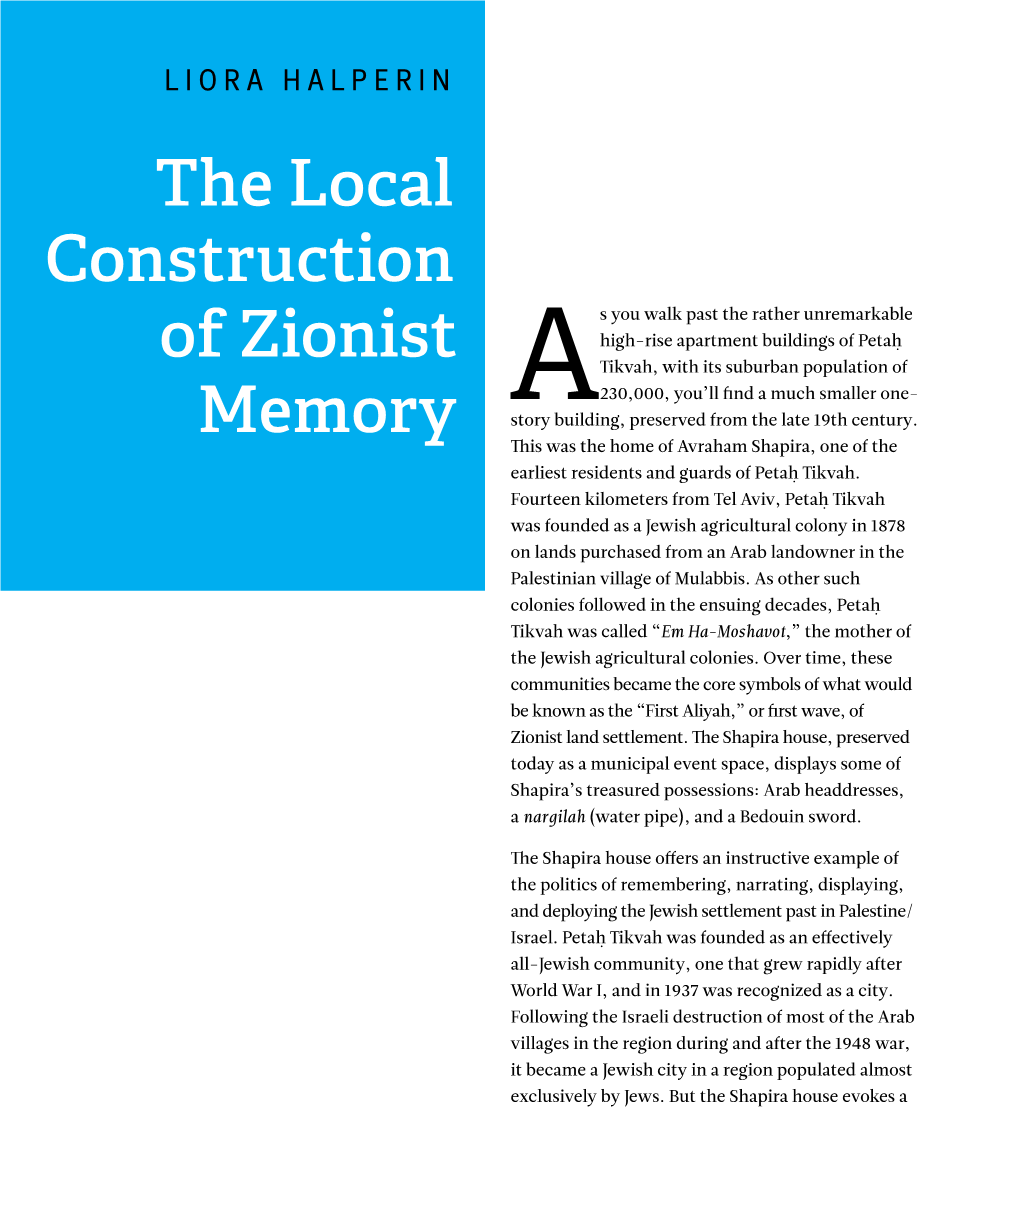 The Local Construction of Zionist Memory